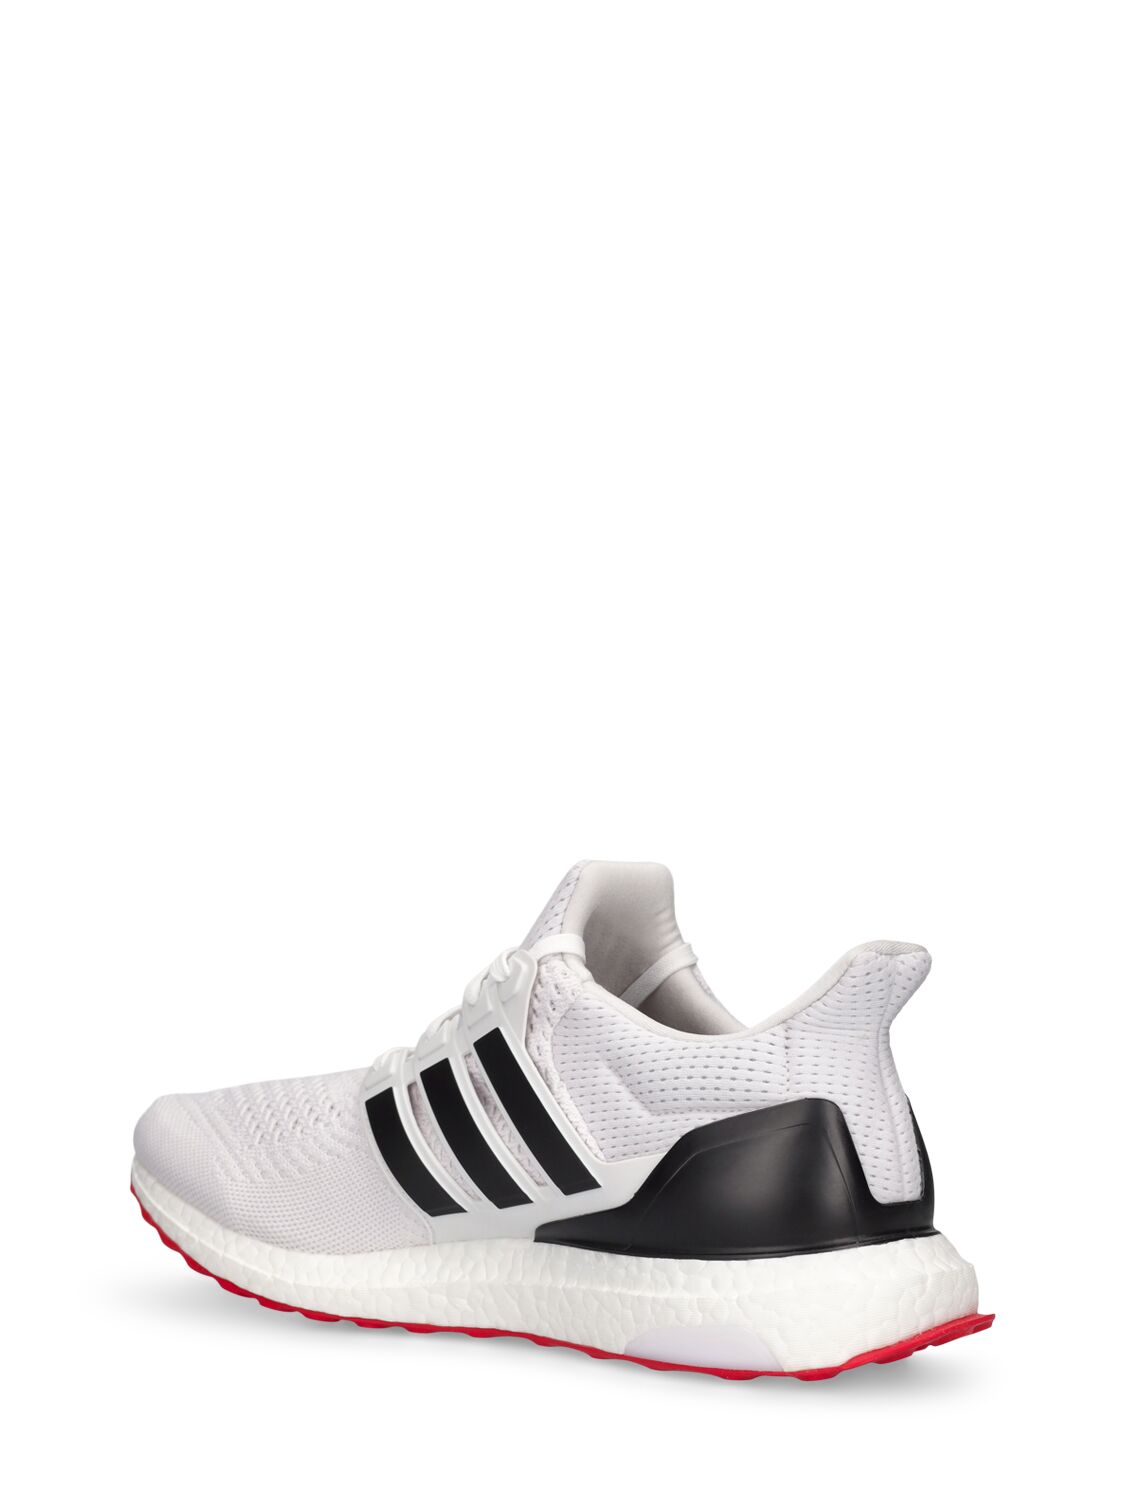 Shop Adidas Originals Ultraboost 1.0 Sneakers In White,black,red